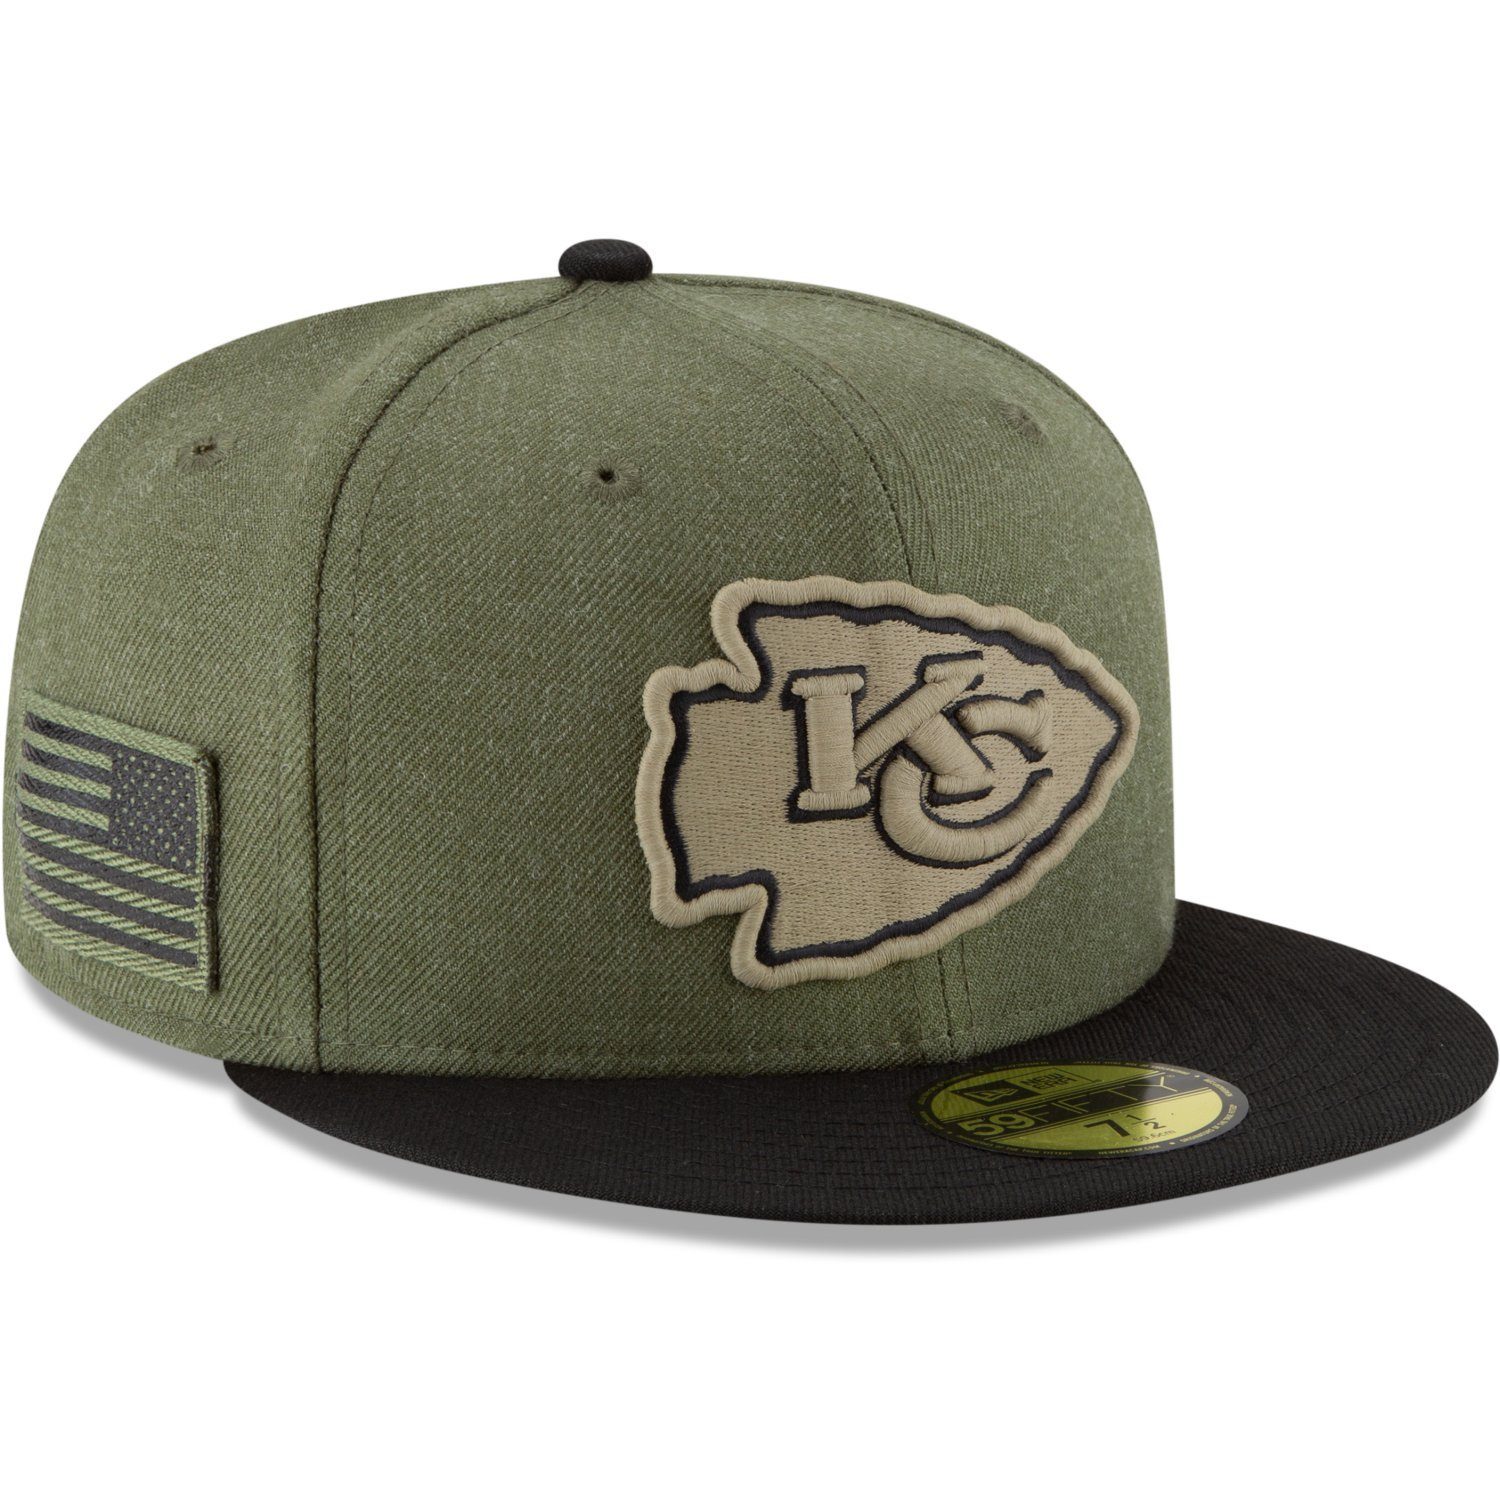 New Era Fitted Cap 59Fifty NFL Salute to Service Kansas City Chiefs